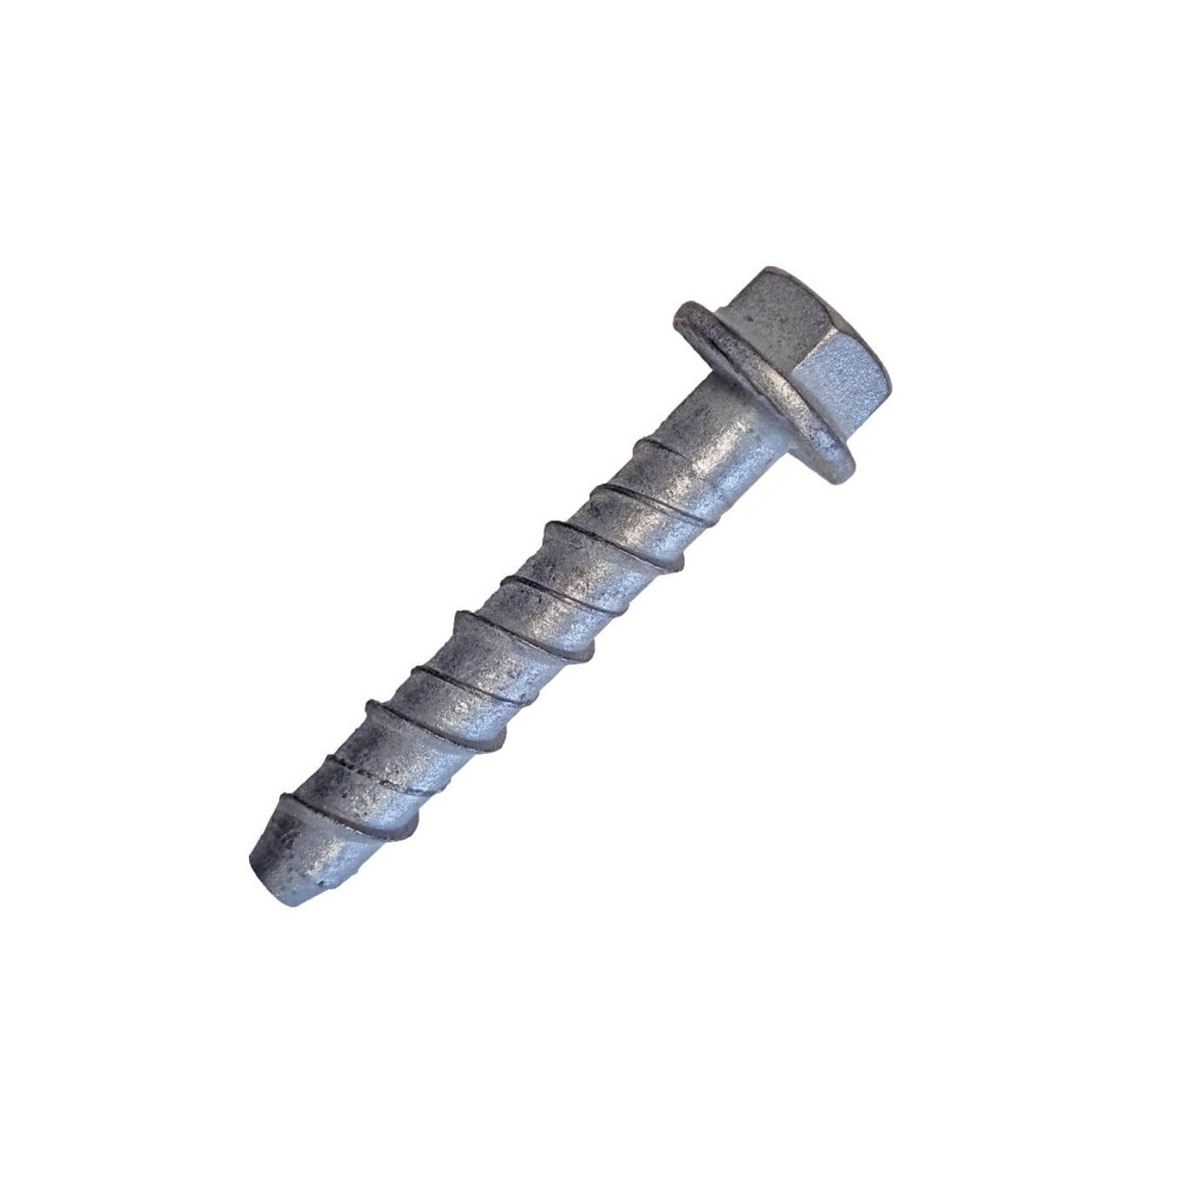 Buy 75mm Screw Bolt Galvanised M12 in Fixings & Installation Products from Astrolift NZ